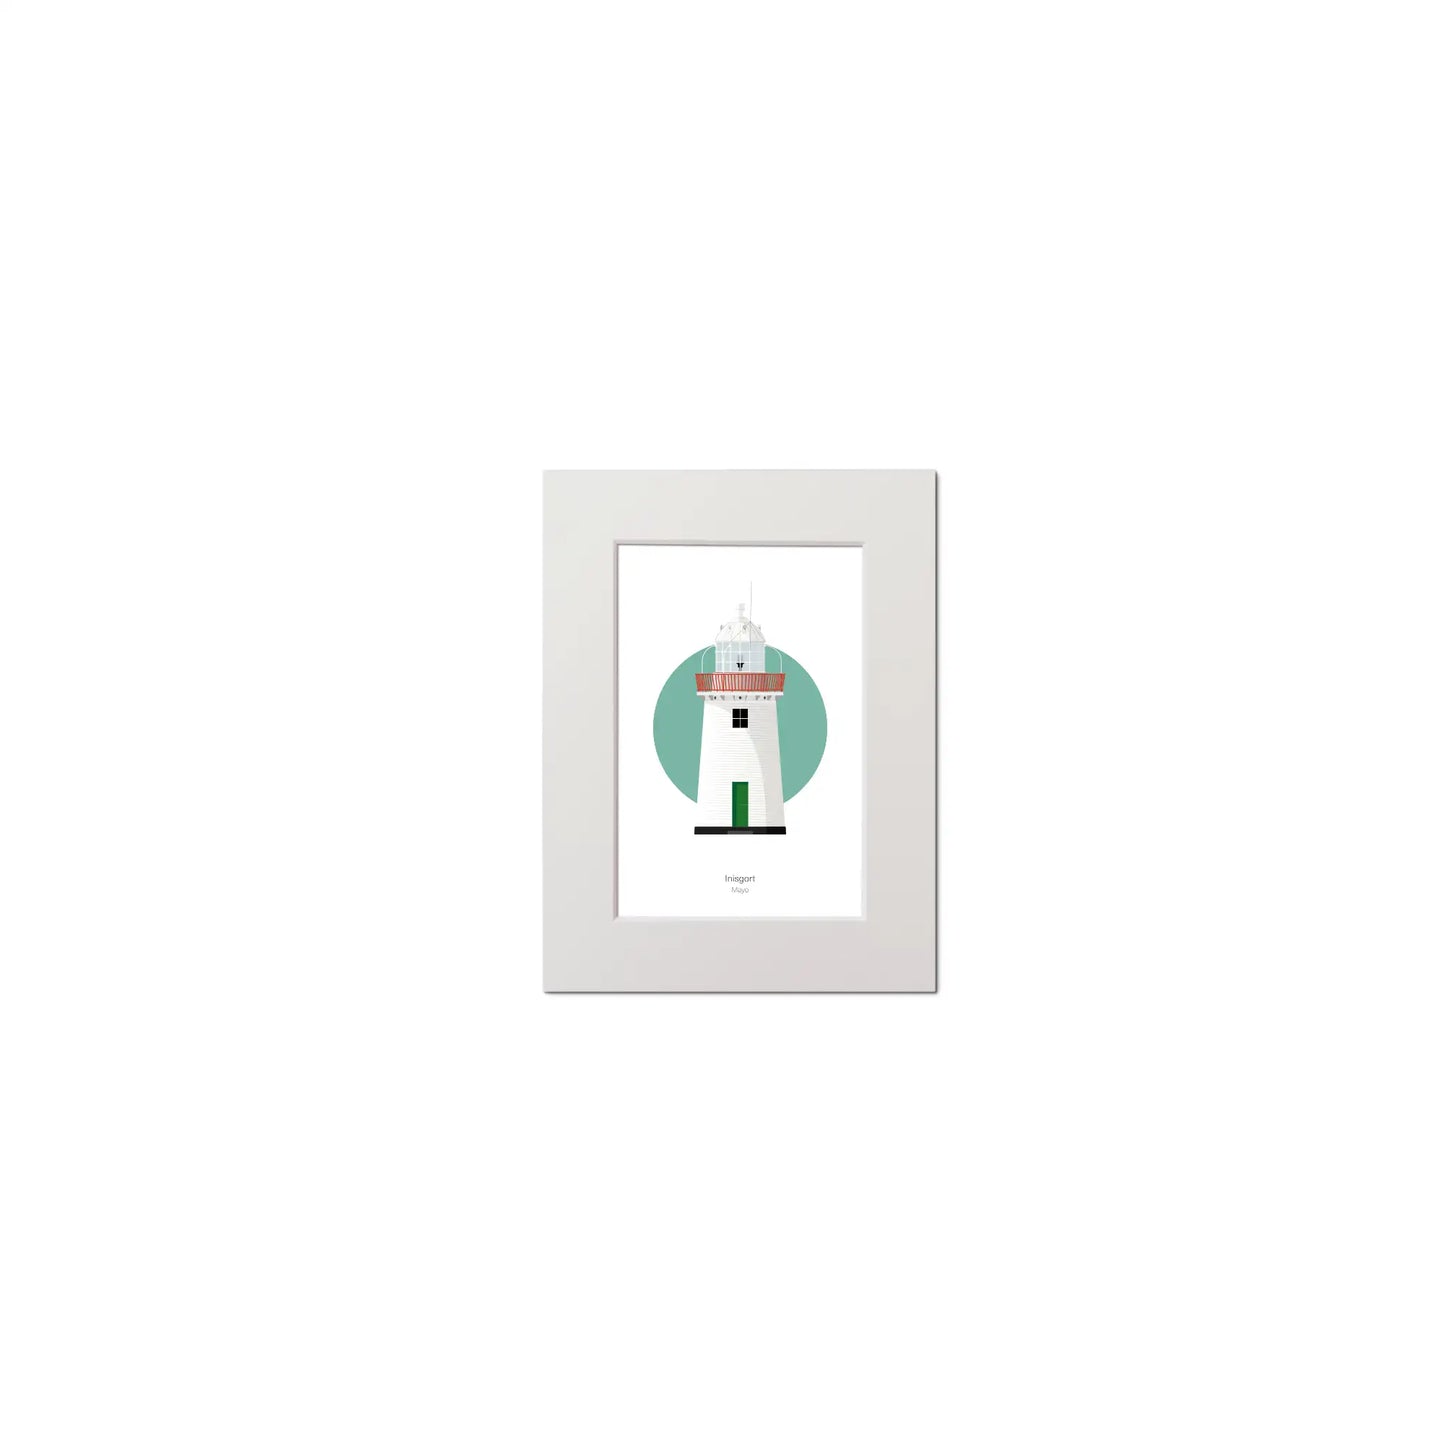 Illustration of Inishgort lighthouse on a white background inside light blue square, mounted and measuring 15x20cm.